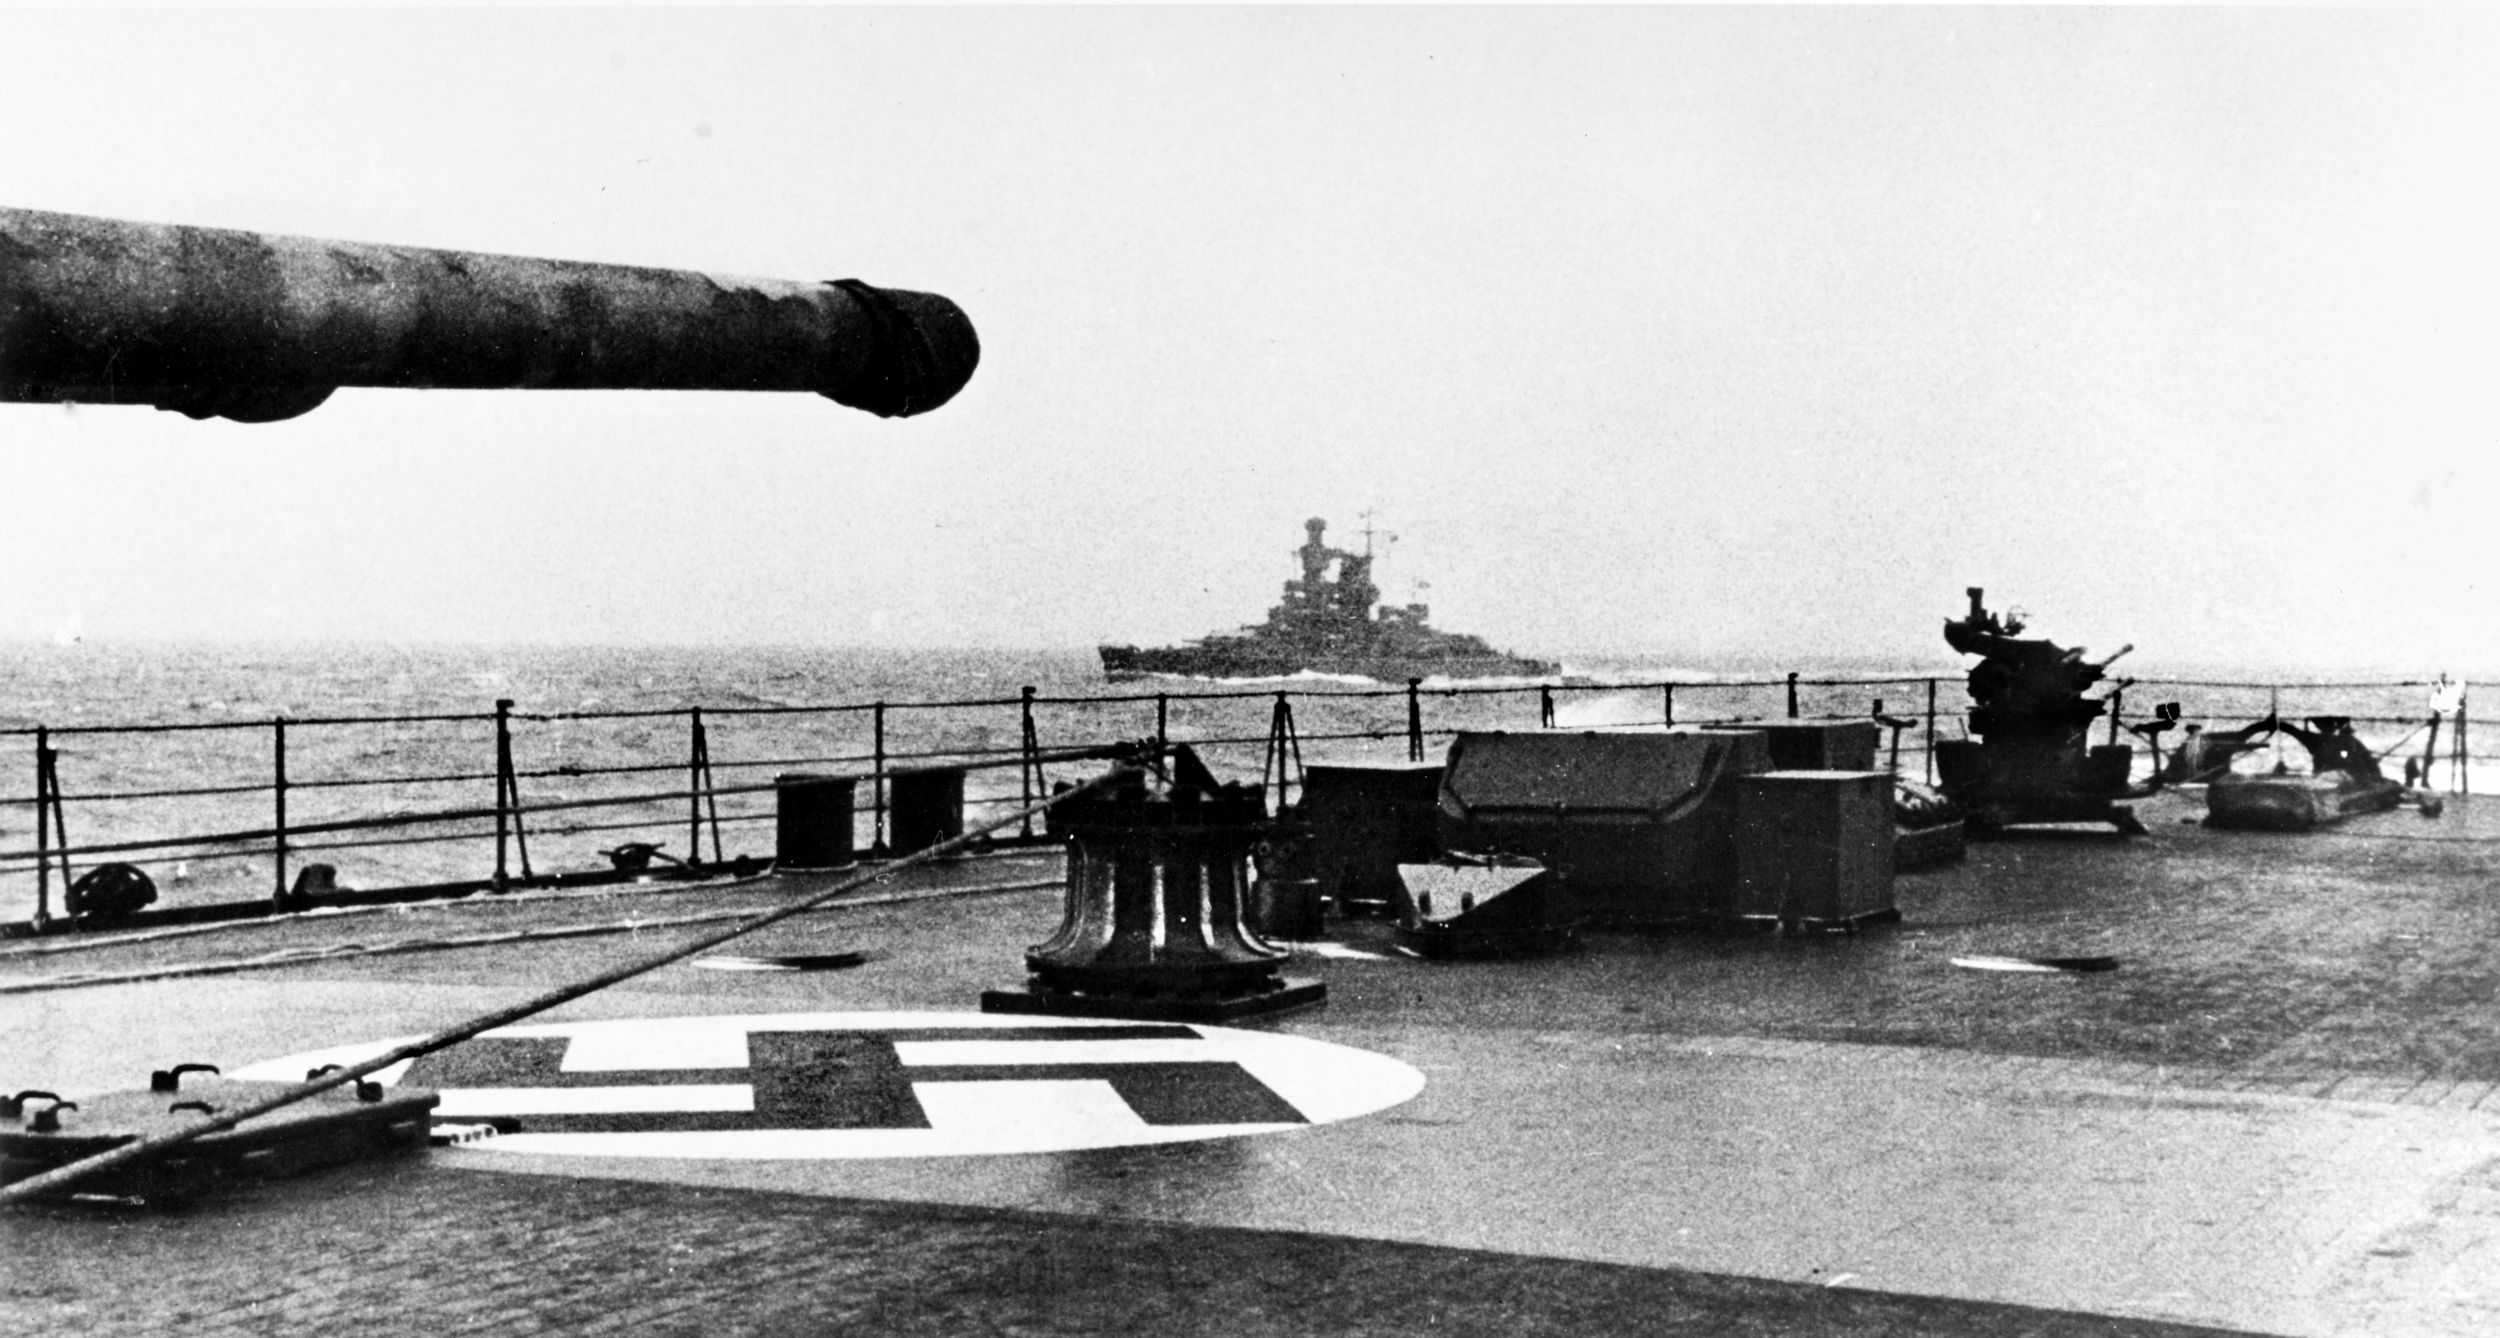 The Kriegsmarine pocket battleship Admiral Scheer is photographed from the deck of the heavy cruiser Prinz Eugen en route to Norway during Operation Cerberus—the “Channel Dash”—in February 1942. Aircraft recognition markings are visible on the deck of Prinz Eugen, as is a portable 20mm antiaircraft gun mounted further aft.